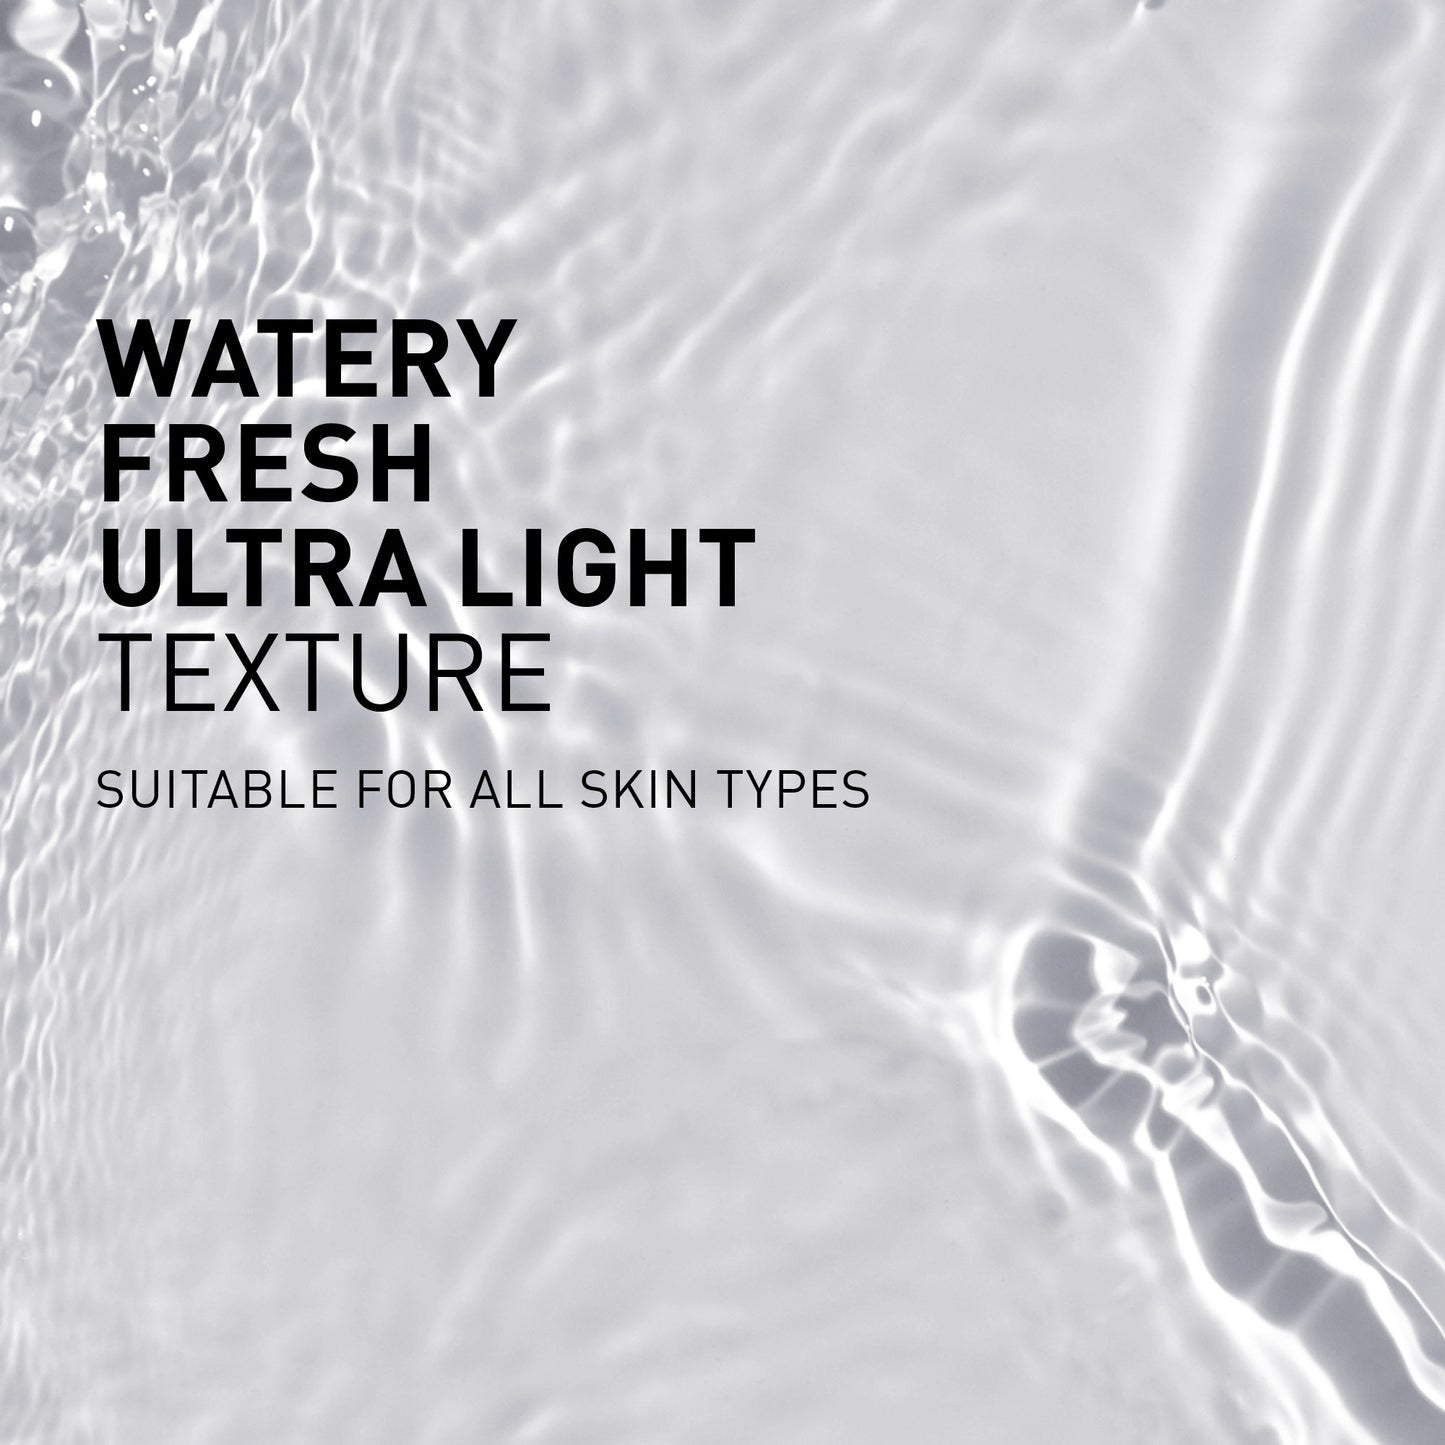 TIME-FILLER ESSENCE - Water, fresh, ultral light texture suitable for all skin types